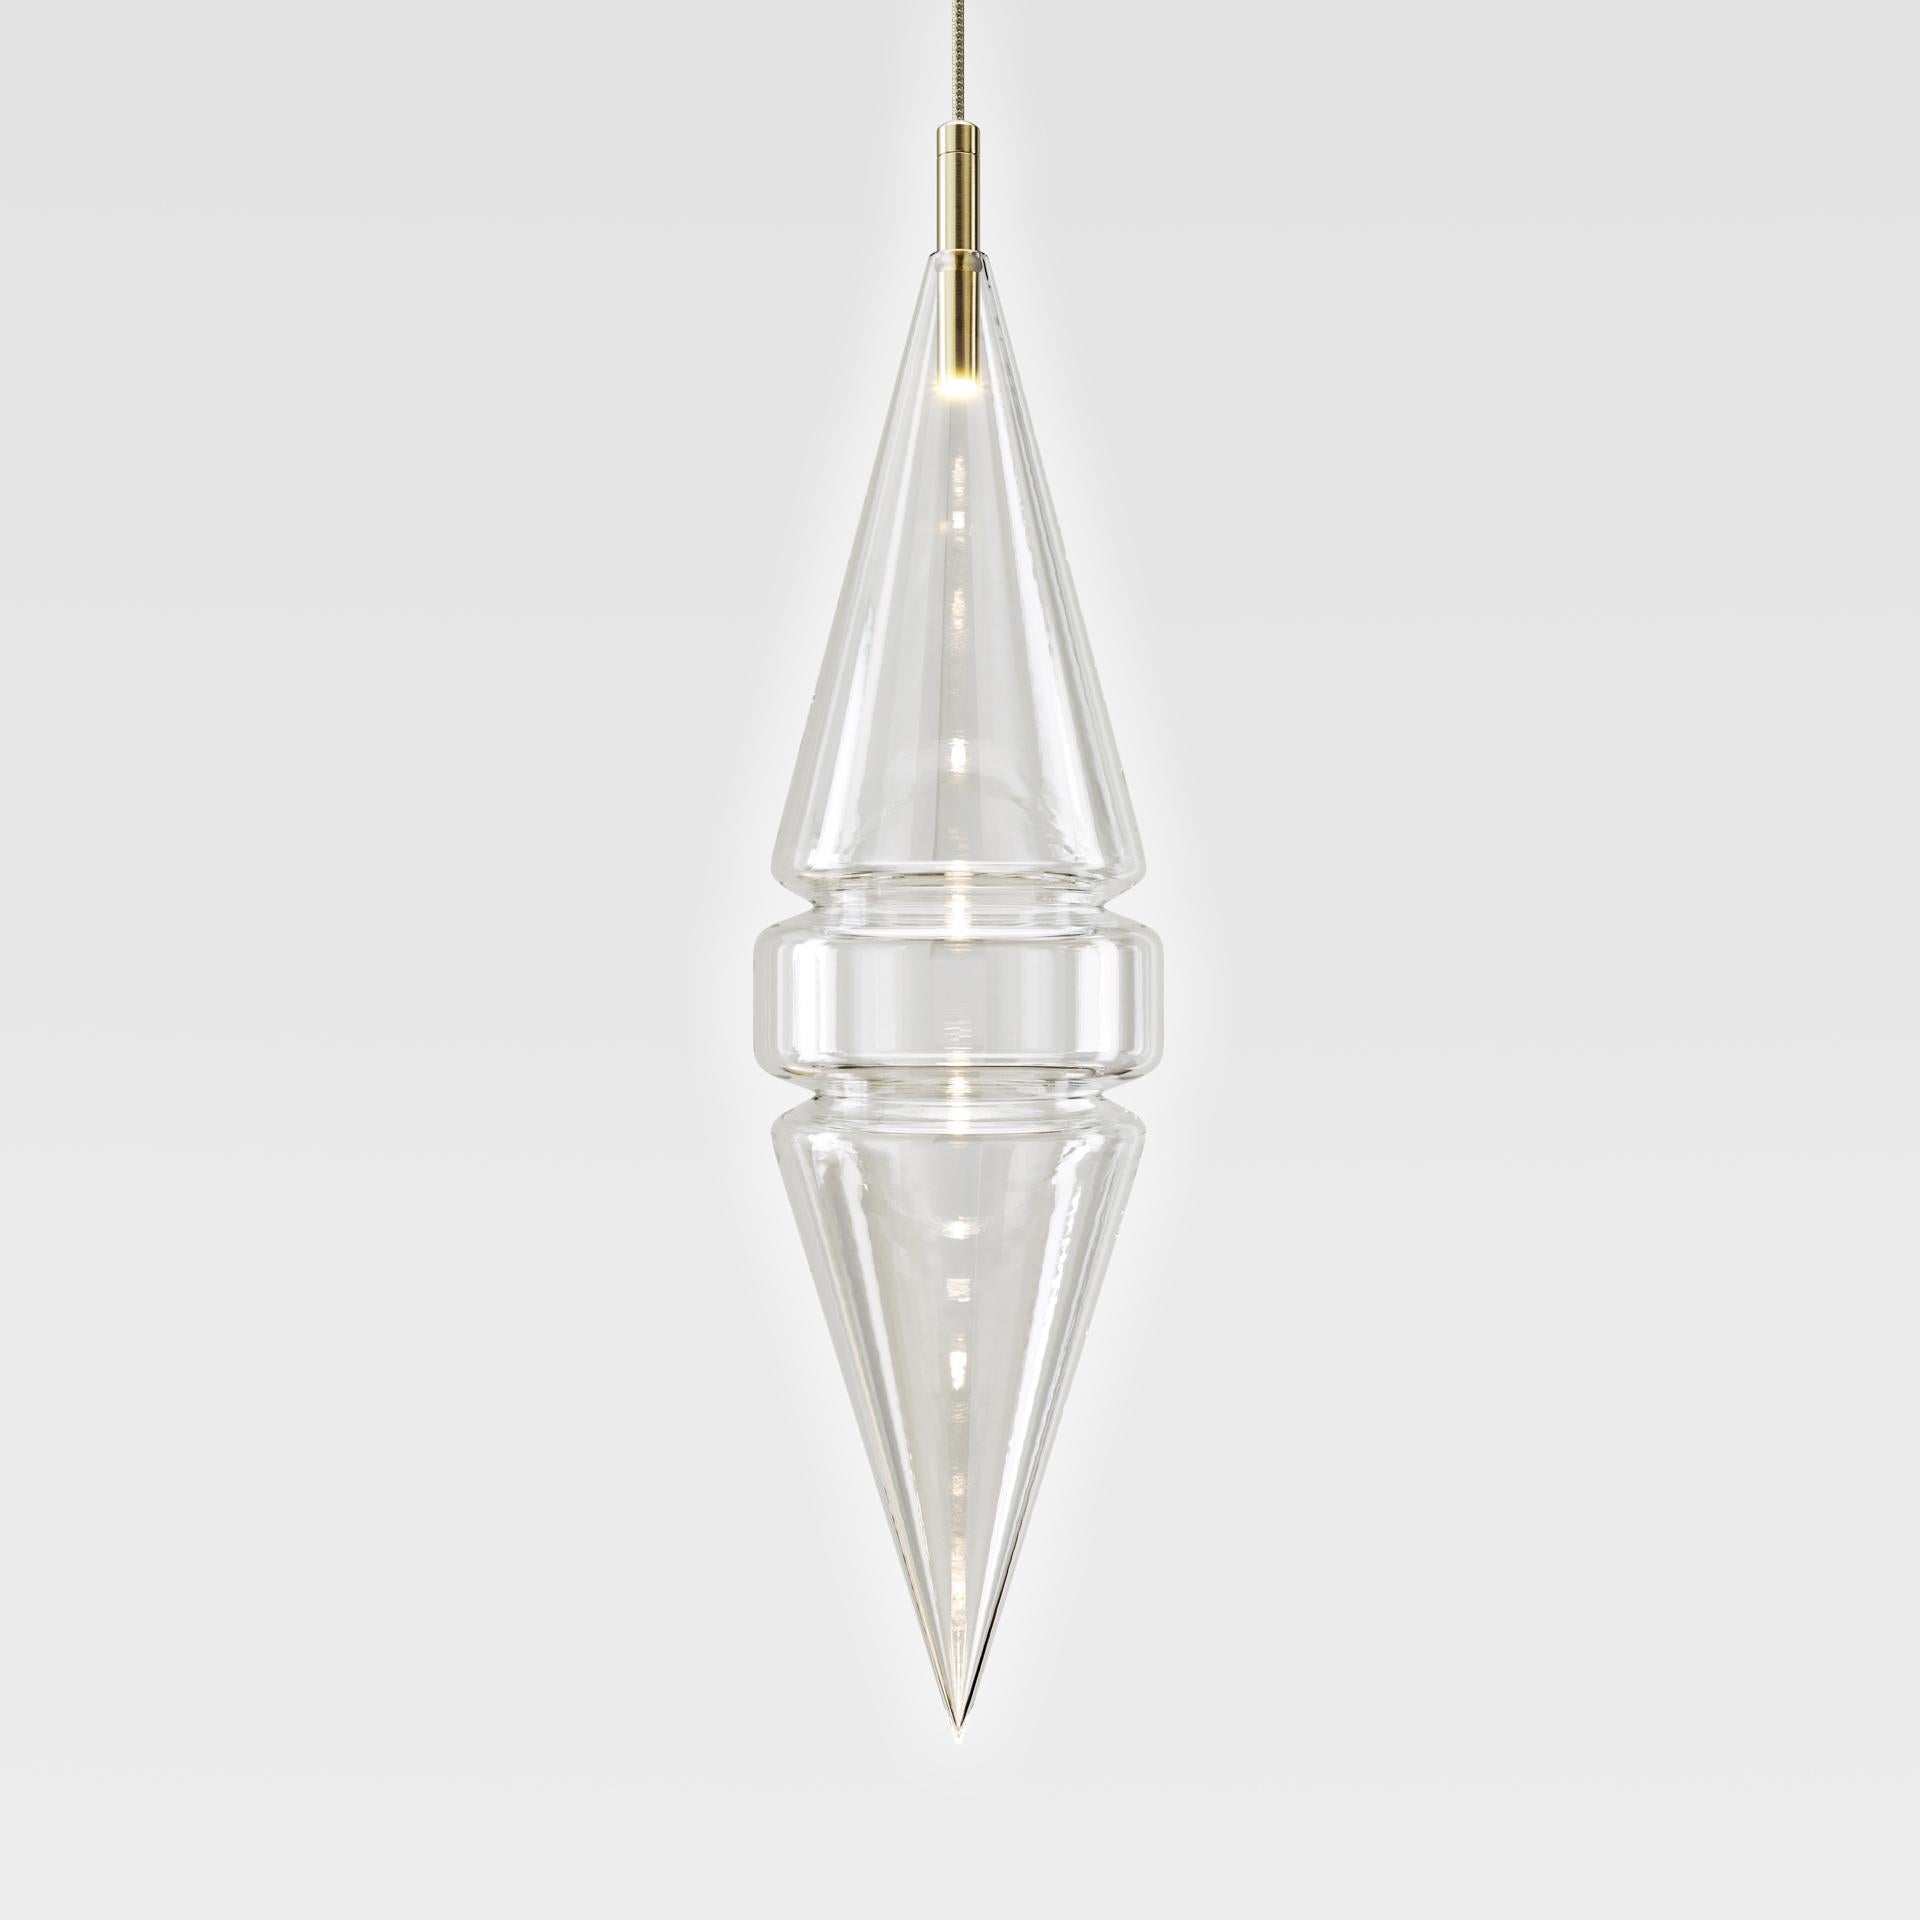 These mesmerising clear glass pendant lights are inspired by the scape of an imaginary city. Shapes and silhouettes, peaks and towers of a futuristic dreamscape. The precision of uniquely skilled medical glass manufacturers made this possible,